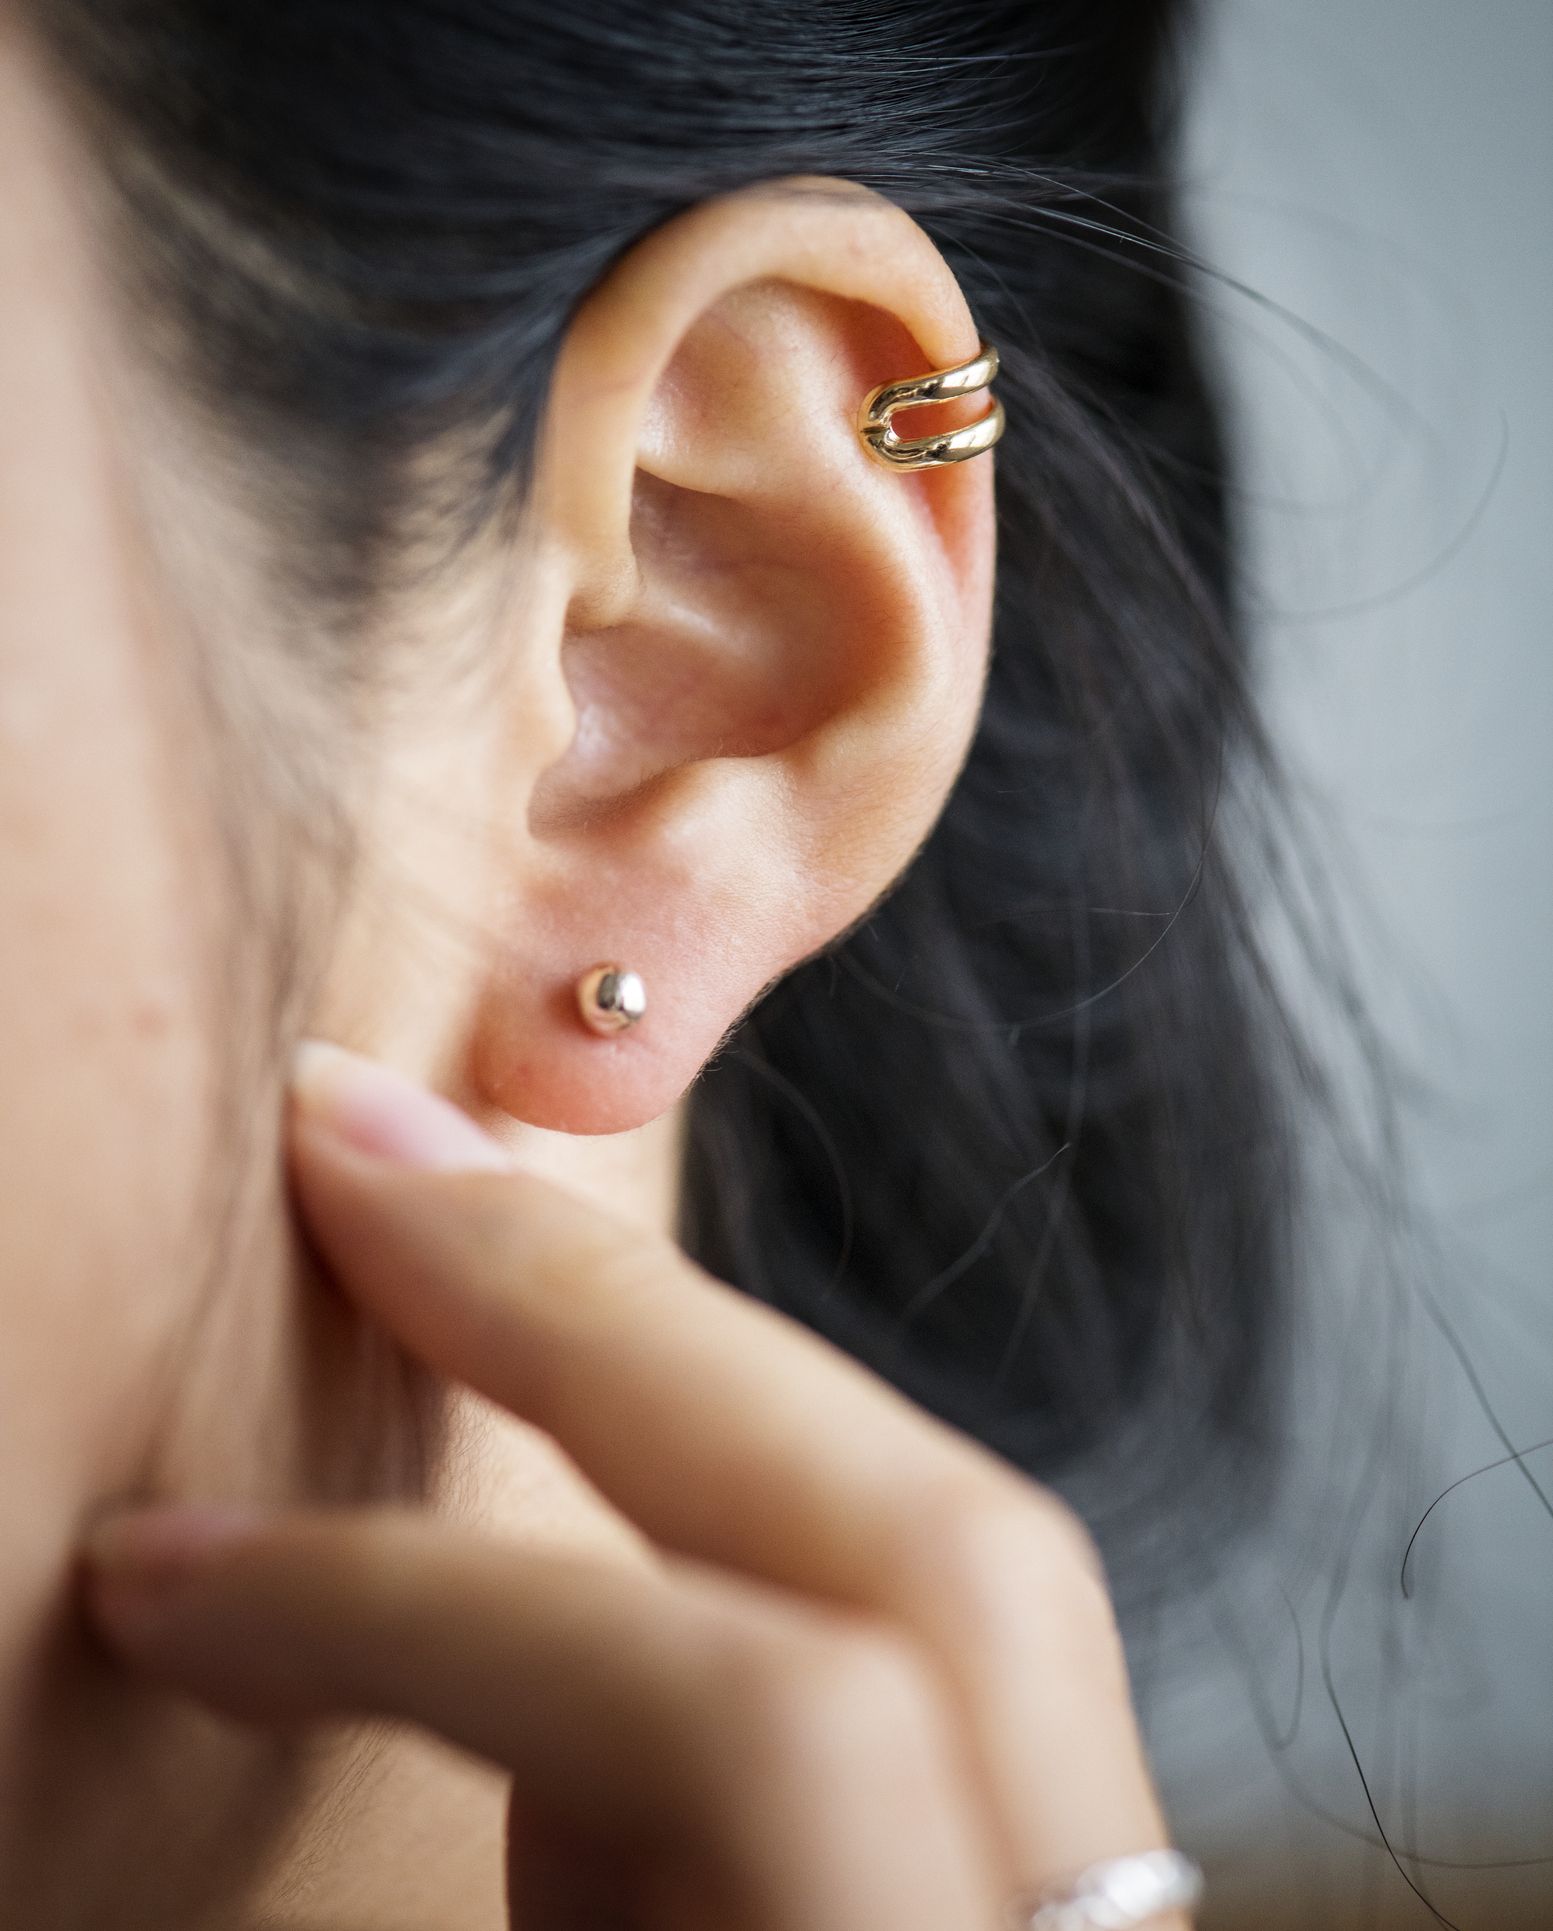 How To Clean New Earring Holes